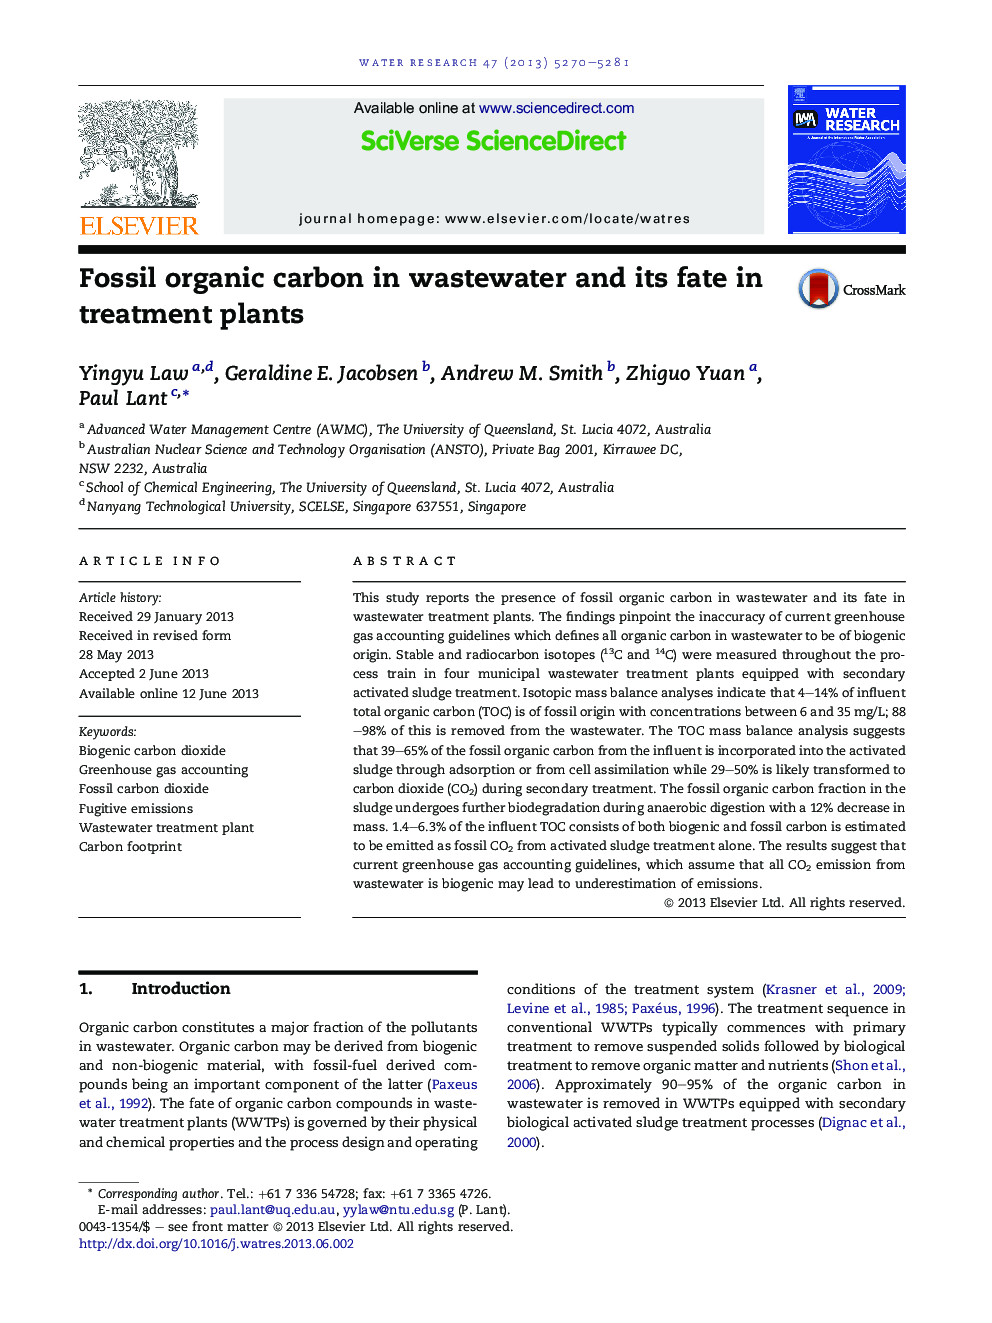 Fossil organic carbon in wastewater and its fate in treatment plants